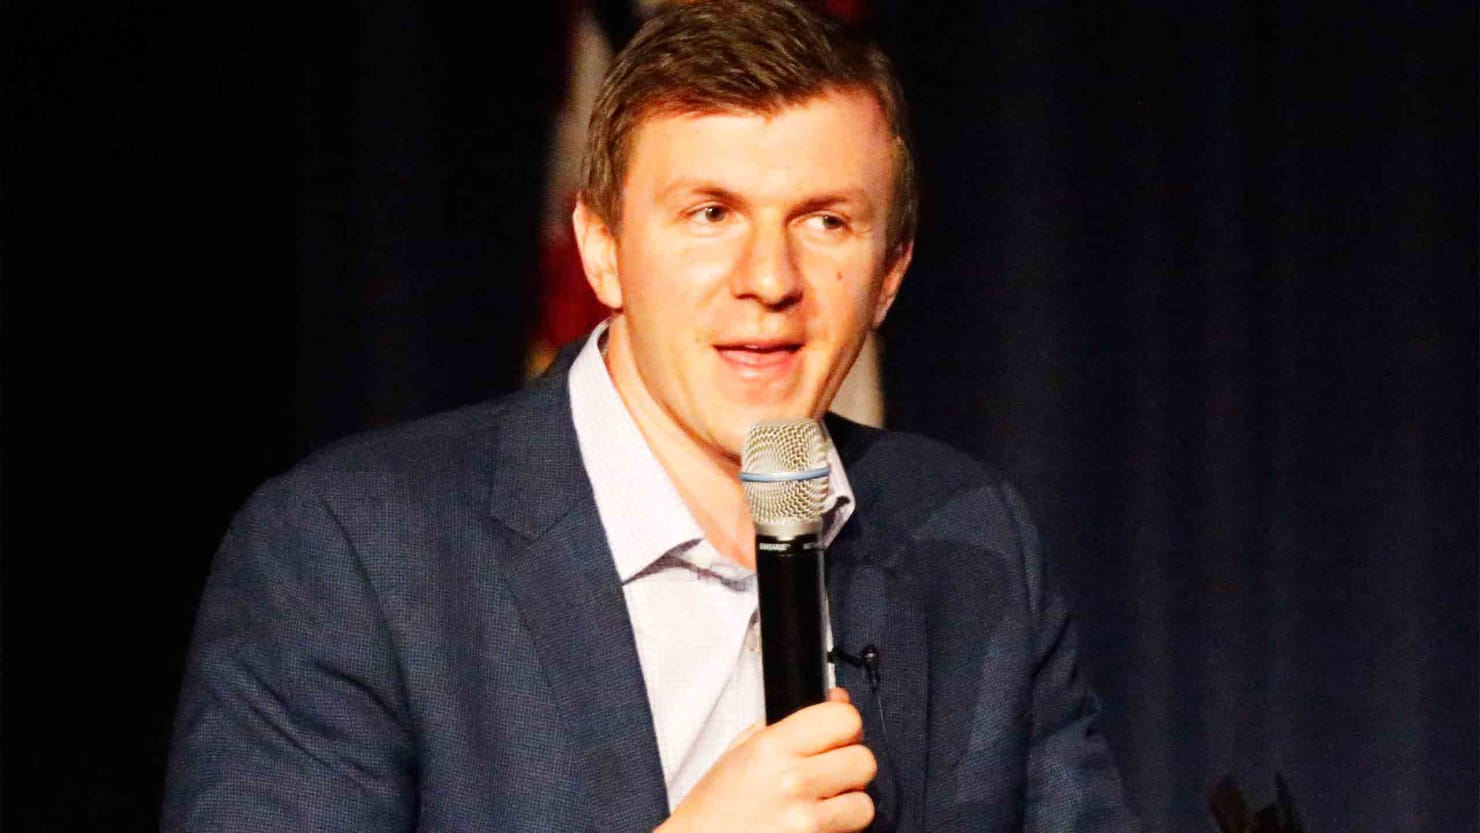 James O’Keefe’s Big-Money Donors Revealed